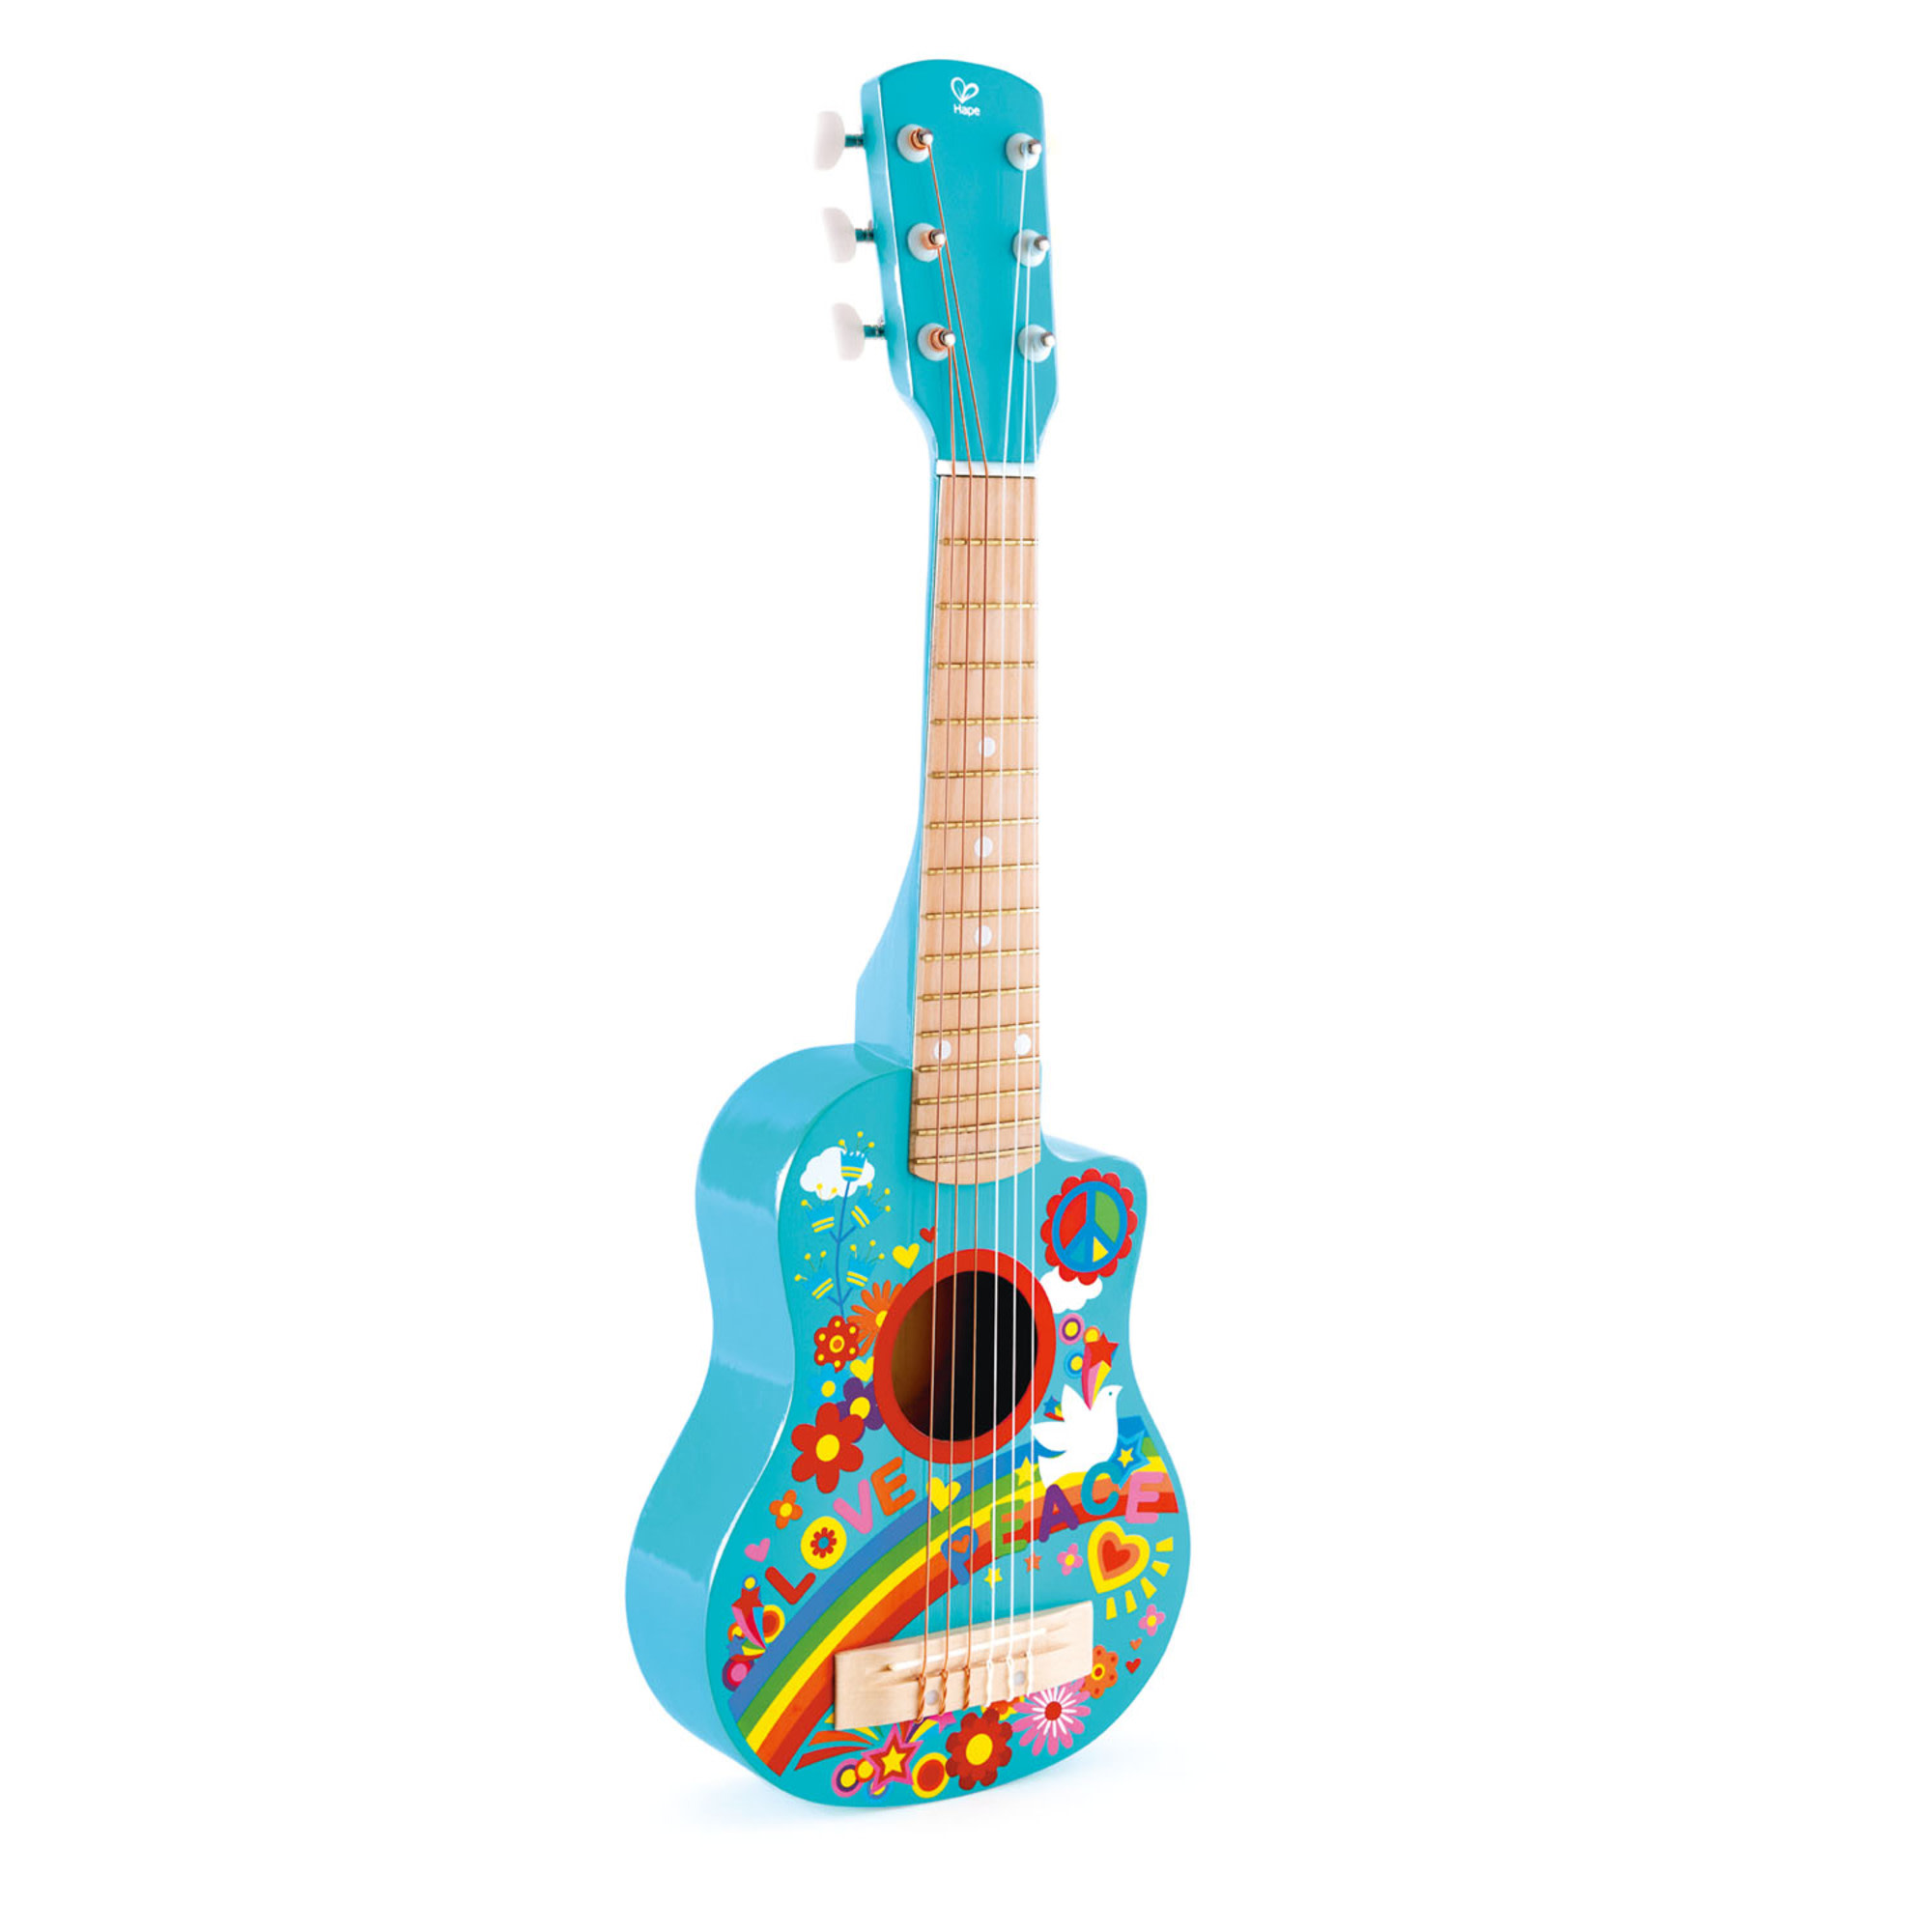 Hape First Flower Power 26" Musical Guitar in Turquoise for Preschool & Toddler - image 1 of 6